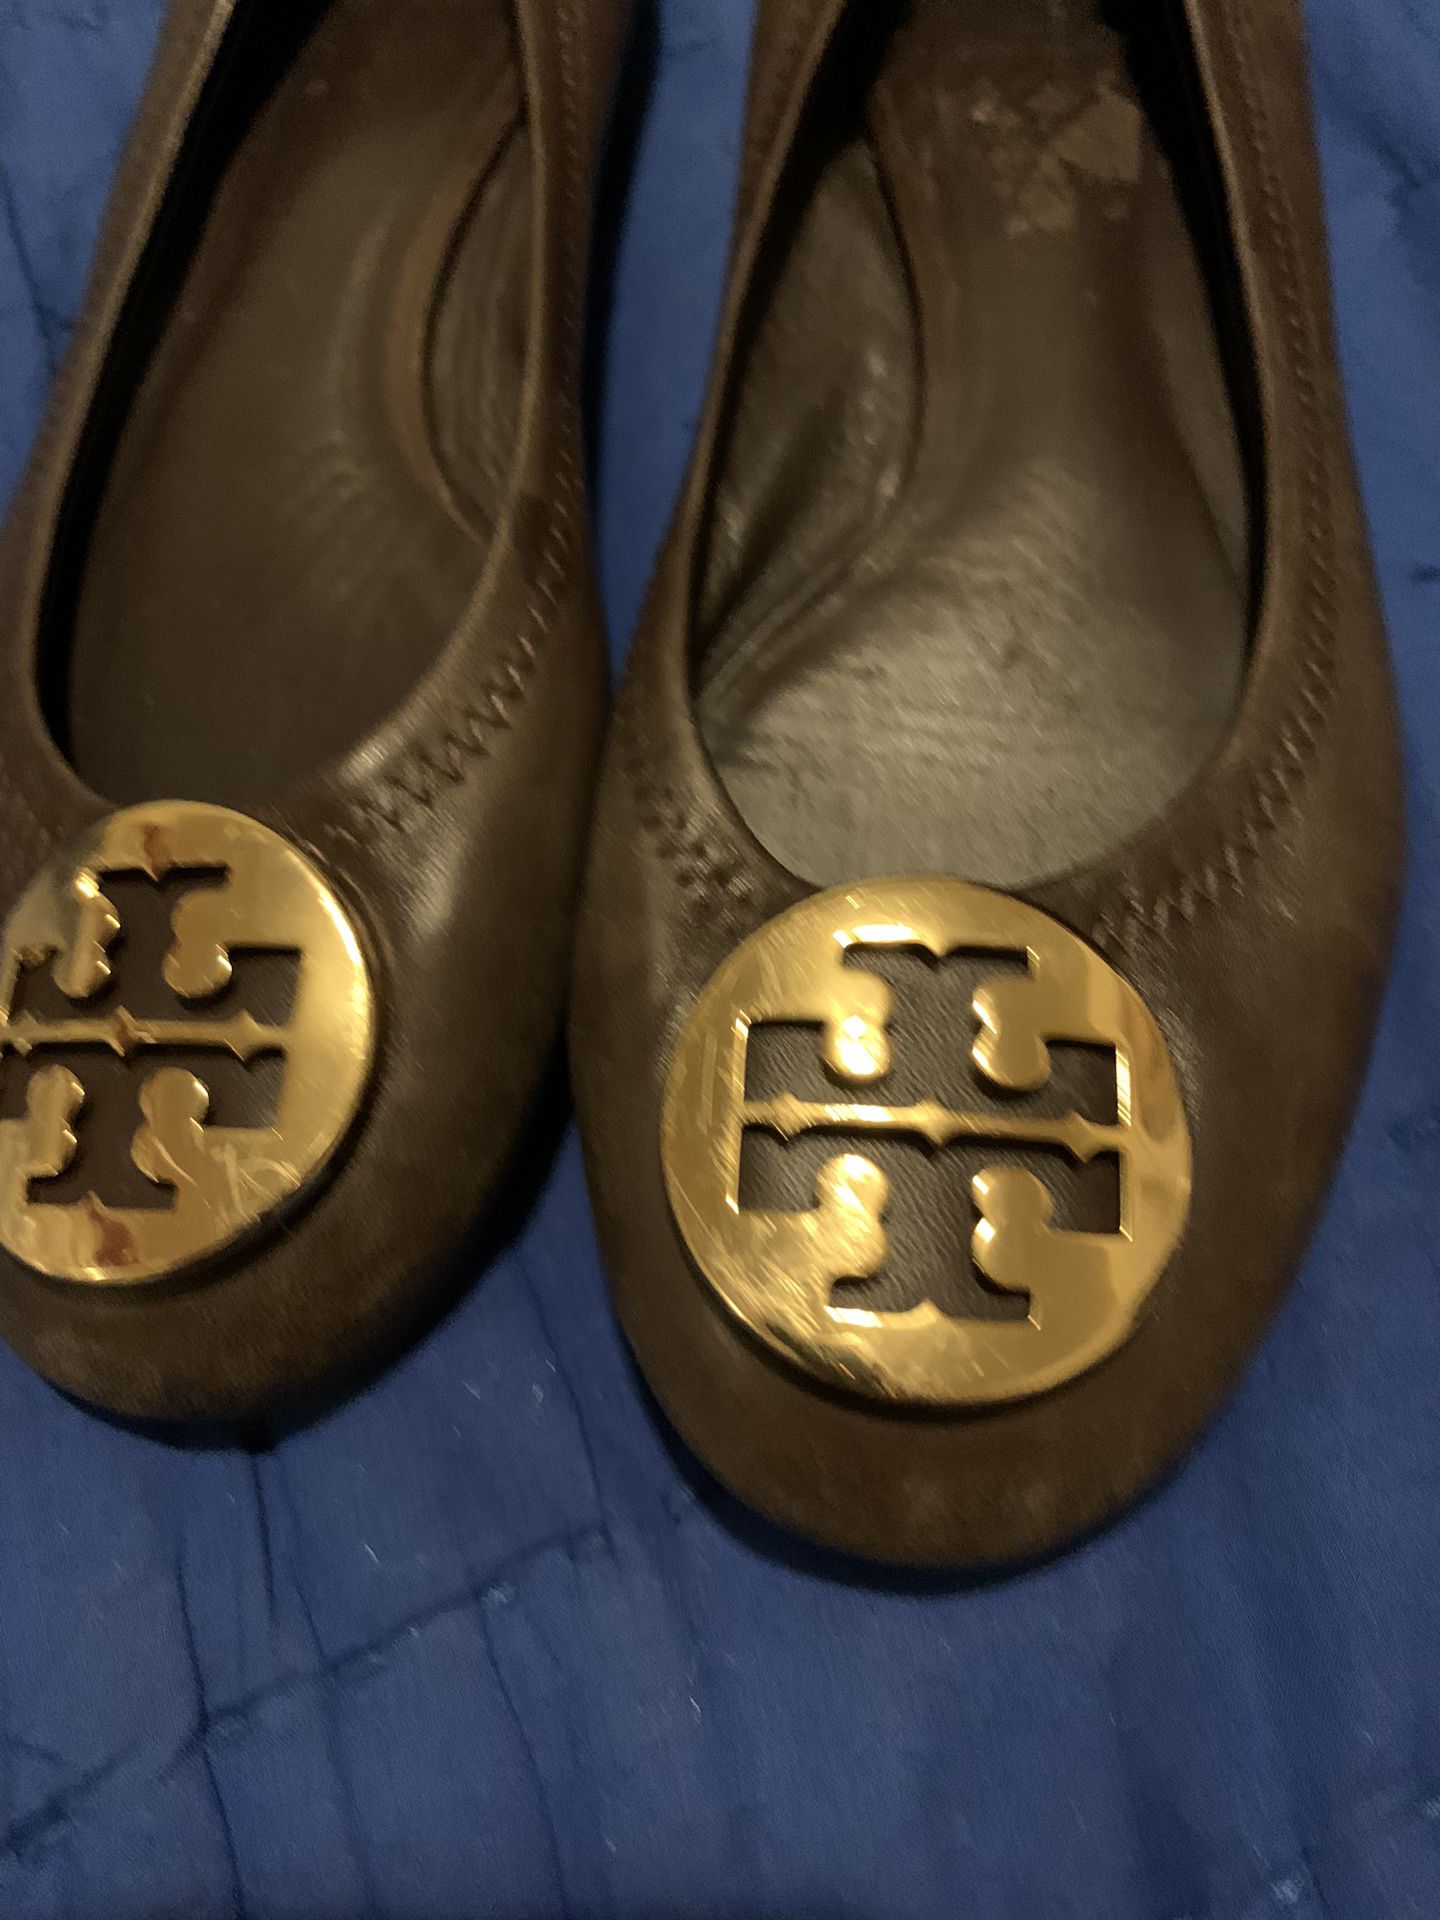 Tory Burch Kids Flat Shoes for Sale in Queens, NY - OfferUp